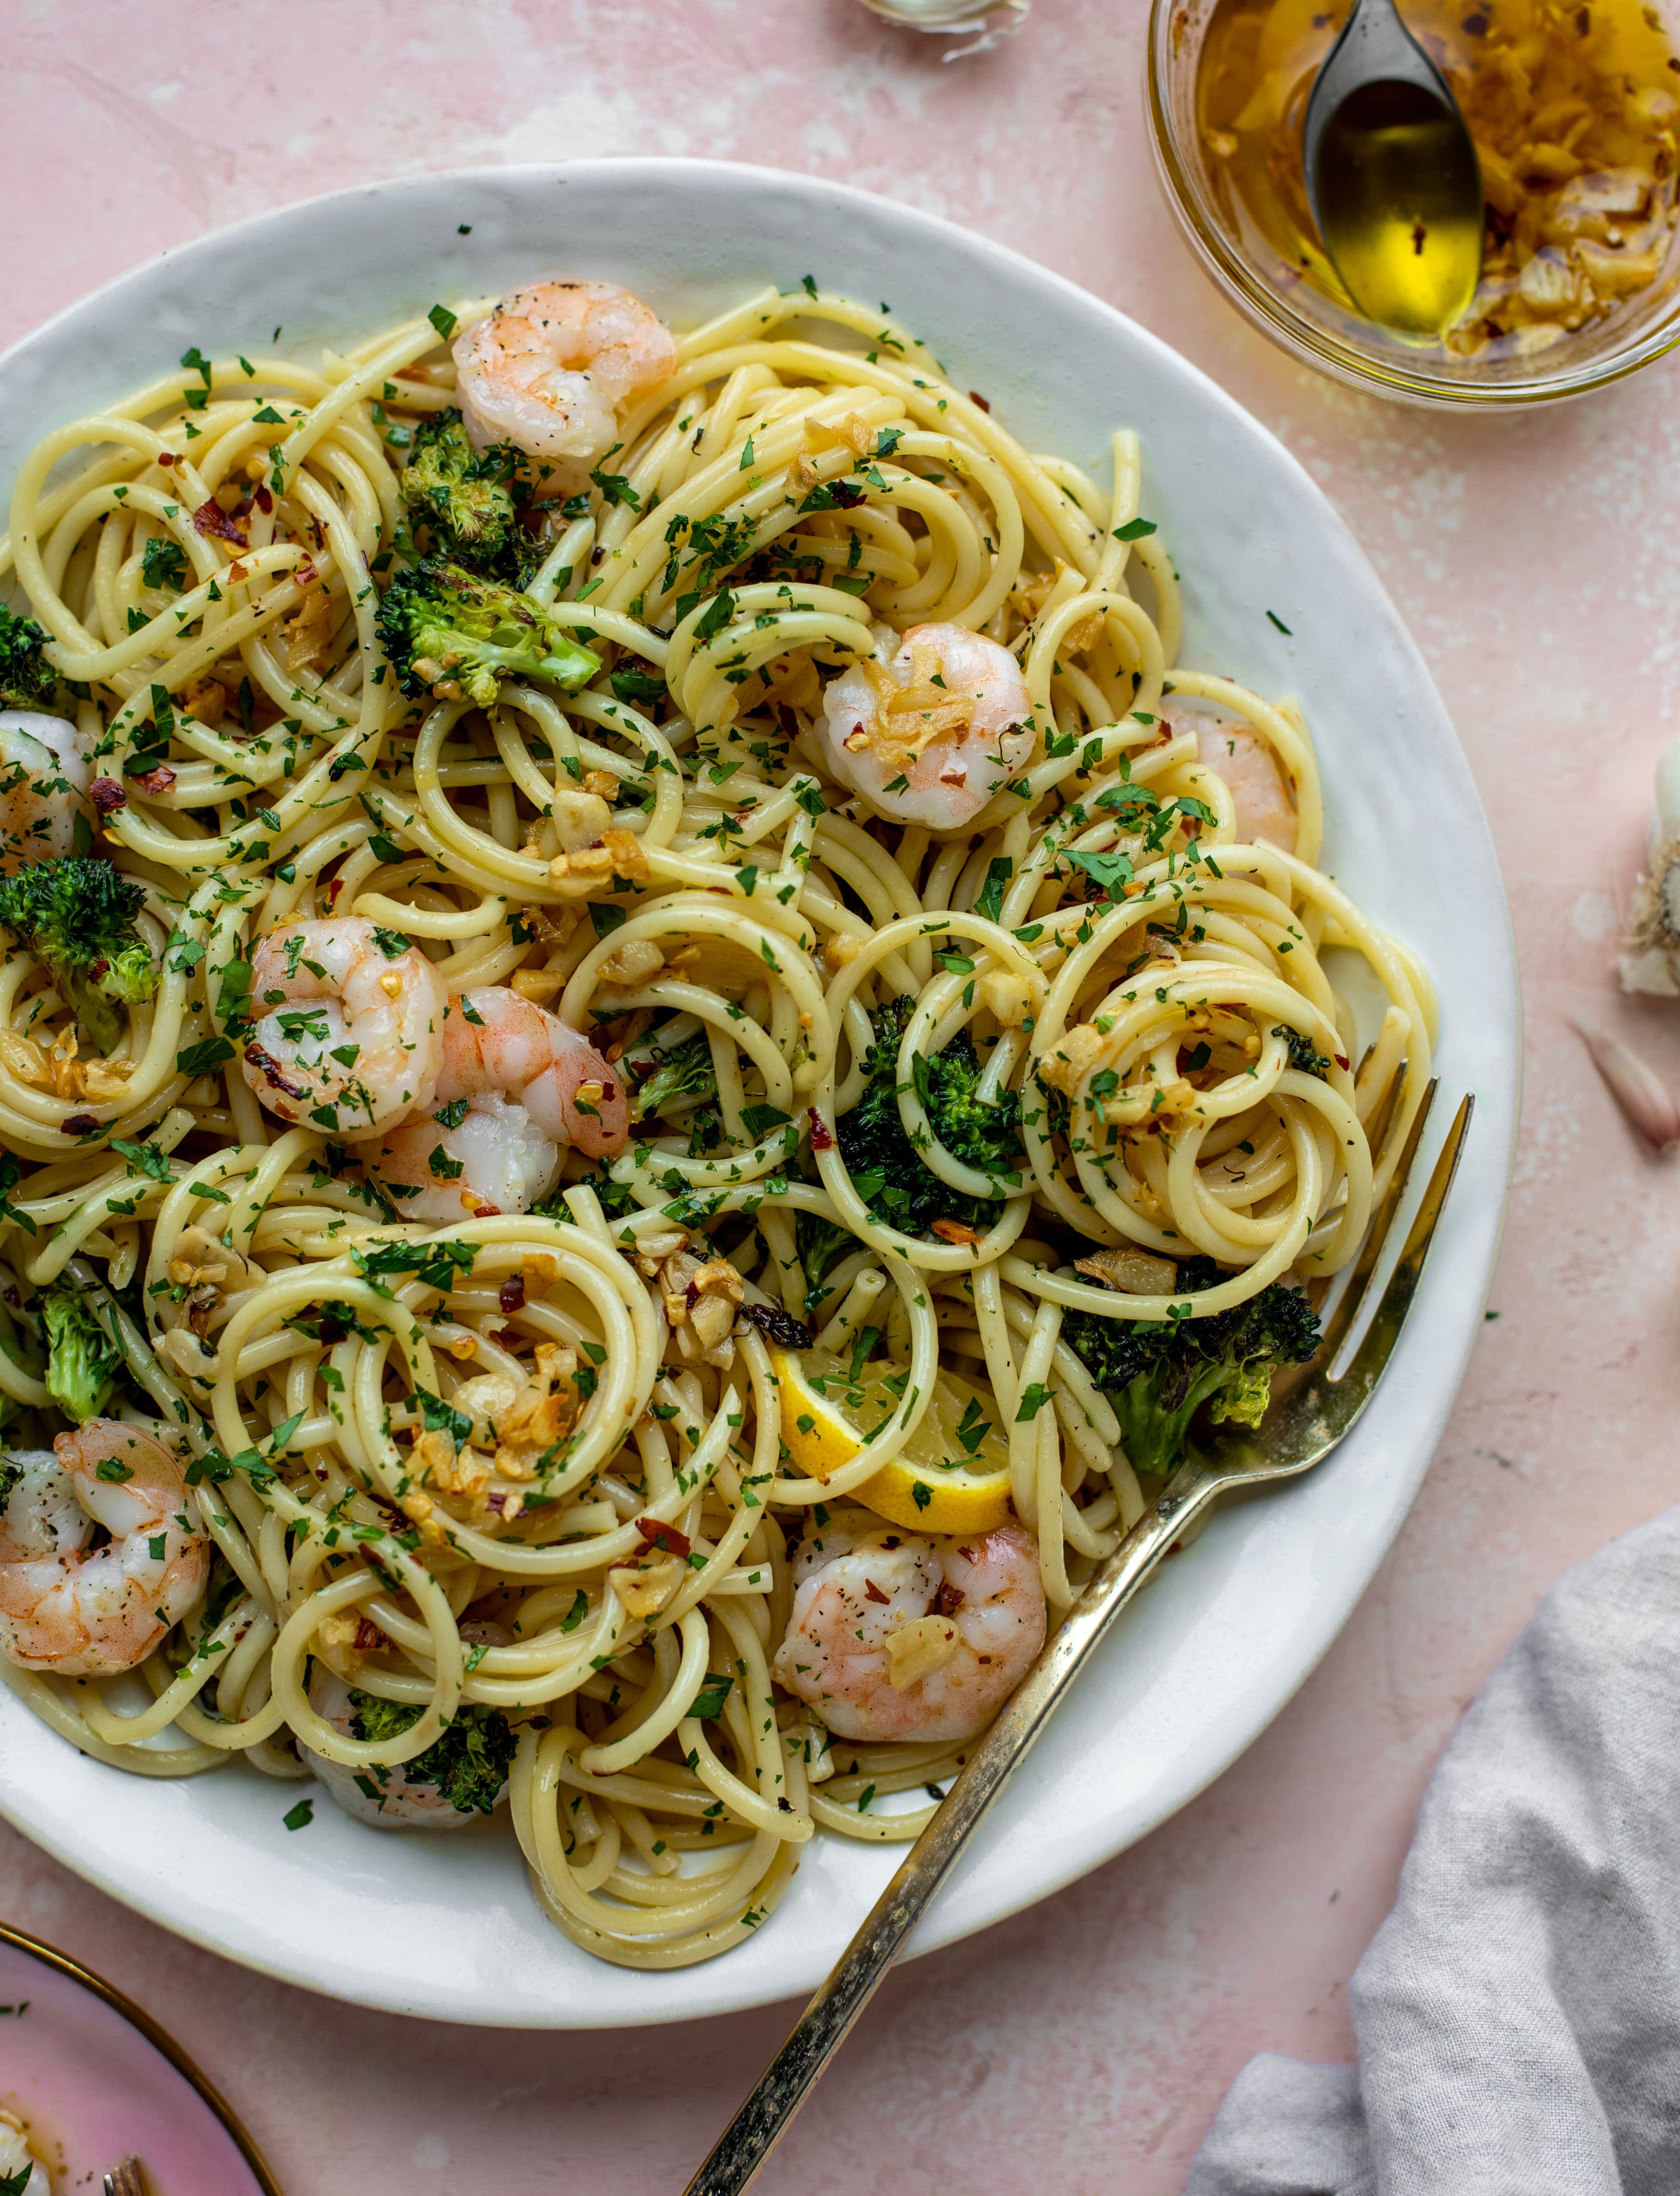 This garlic sauce pasta is incredible! Roasted shrimp and broccoli twirled with garlic oil noodles and crushed red pepper. Divine!